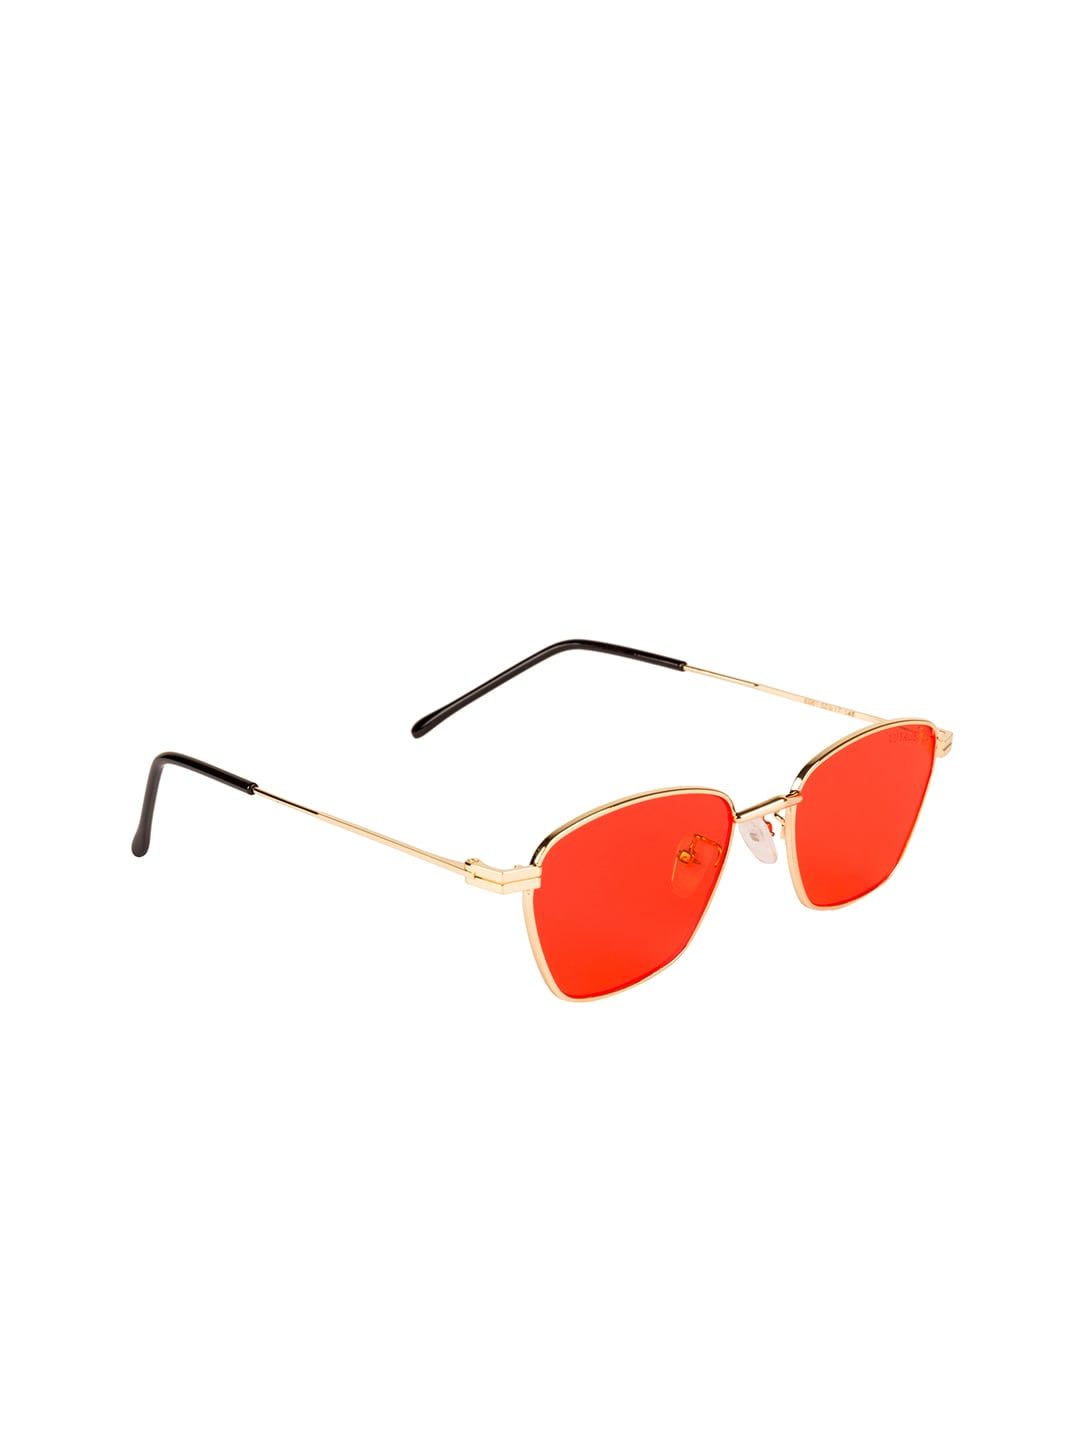 Voyage Unisex Square UV Protected Sunglasses 8961MG3236 Price in India